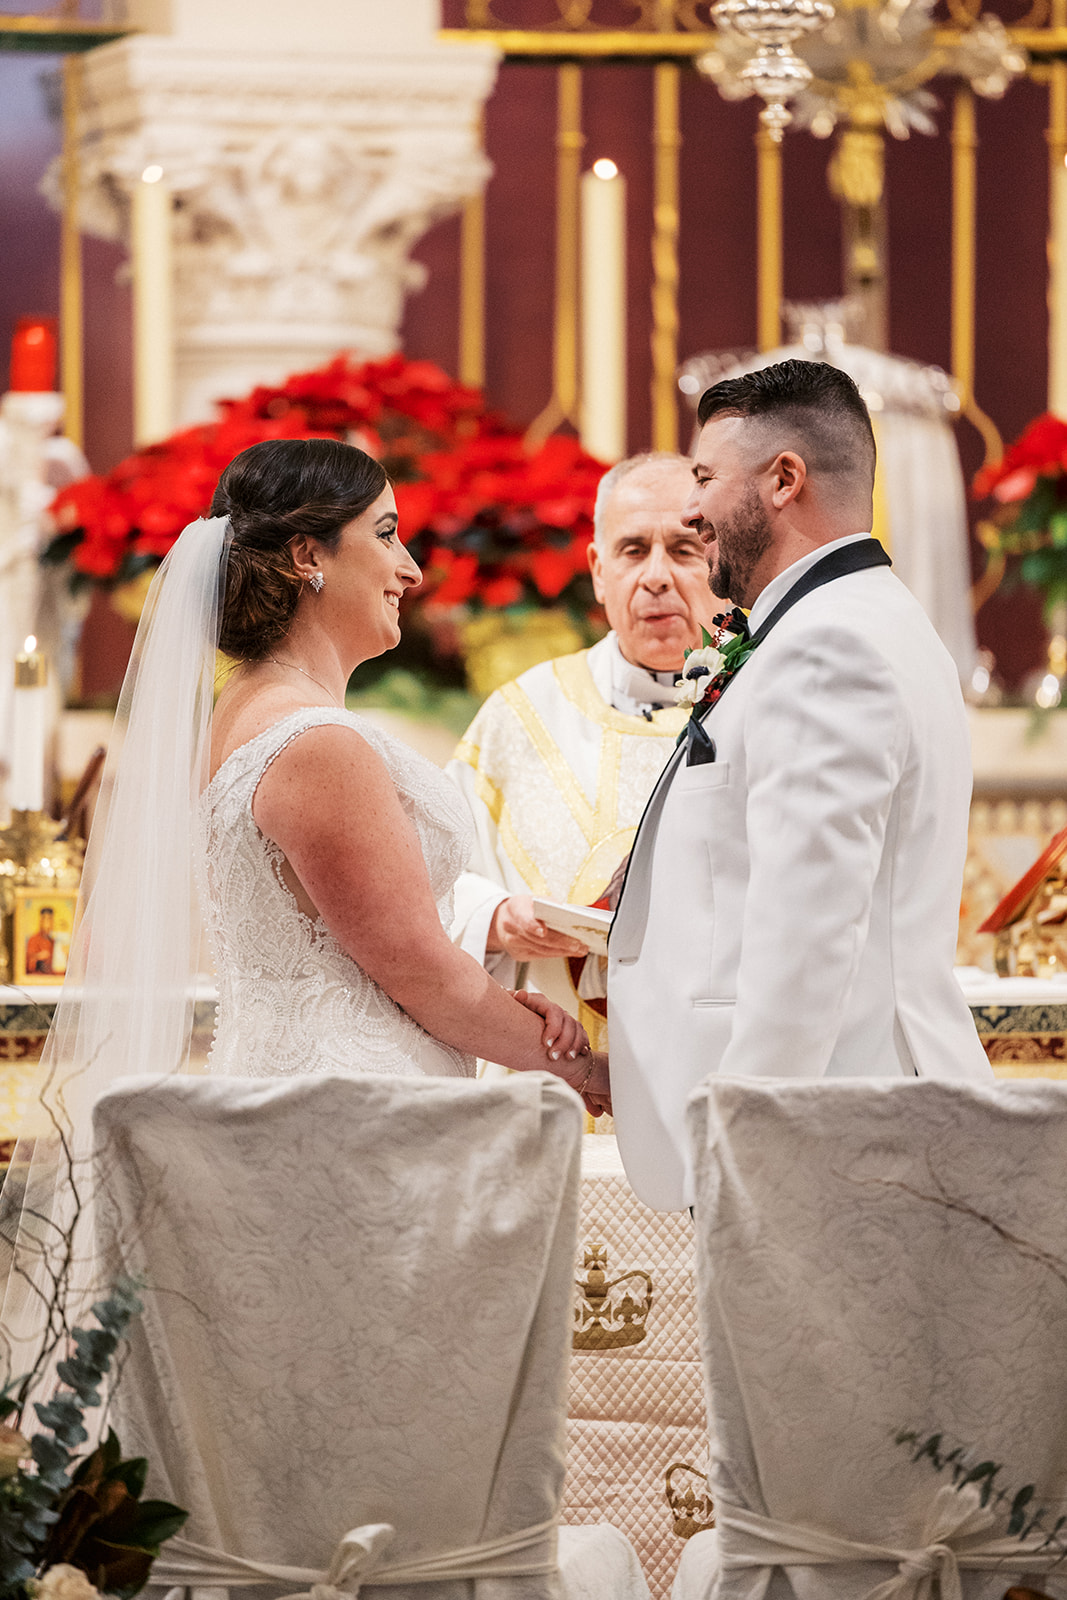 Newlyweds stand together holding hands at the altar during their ceremony